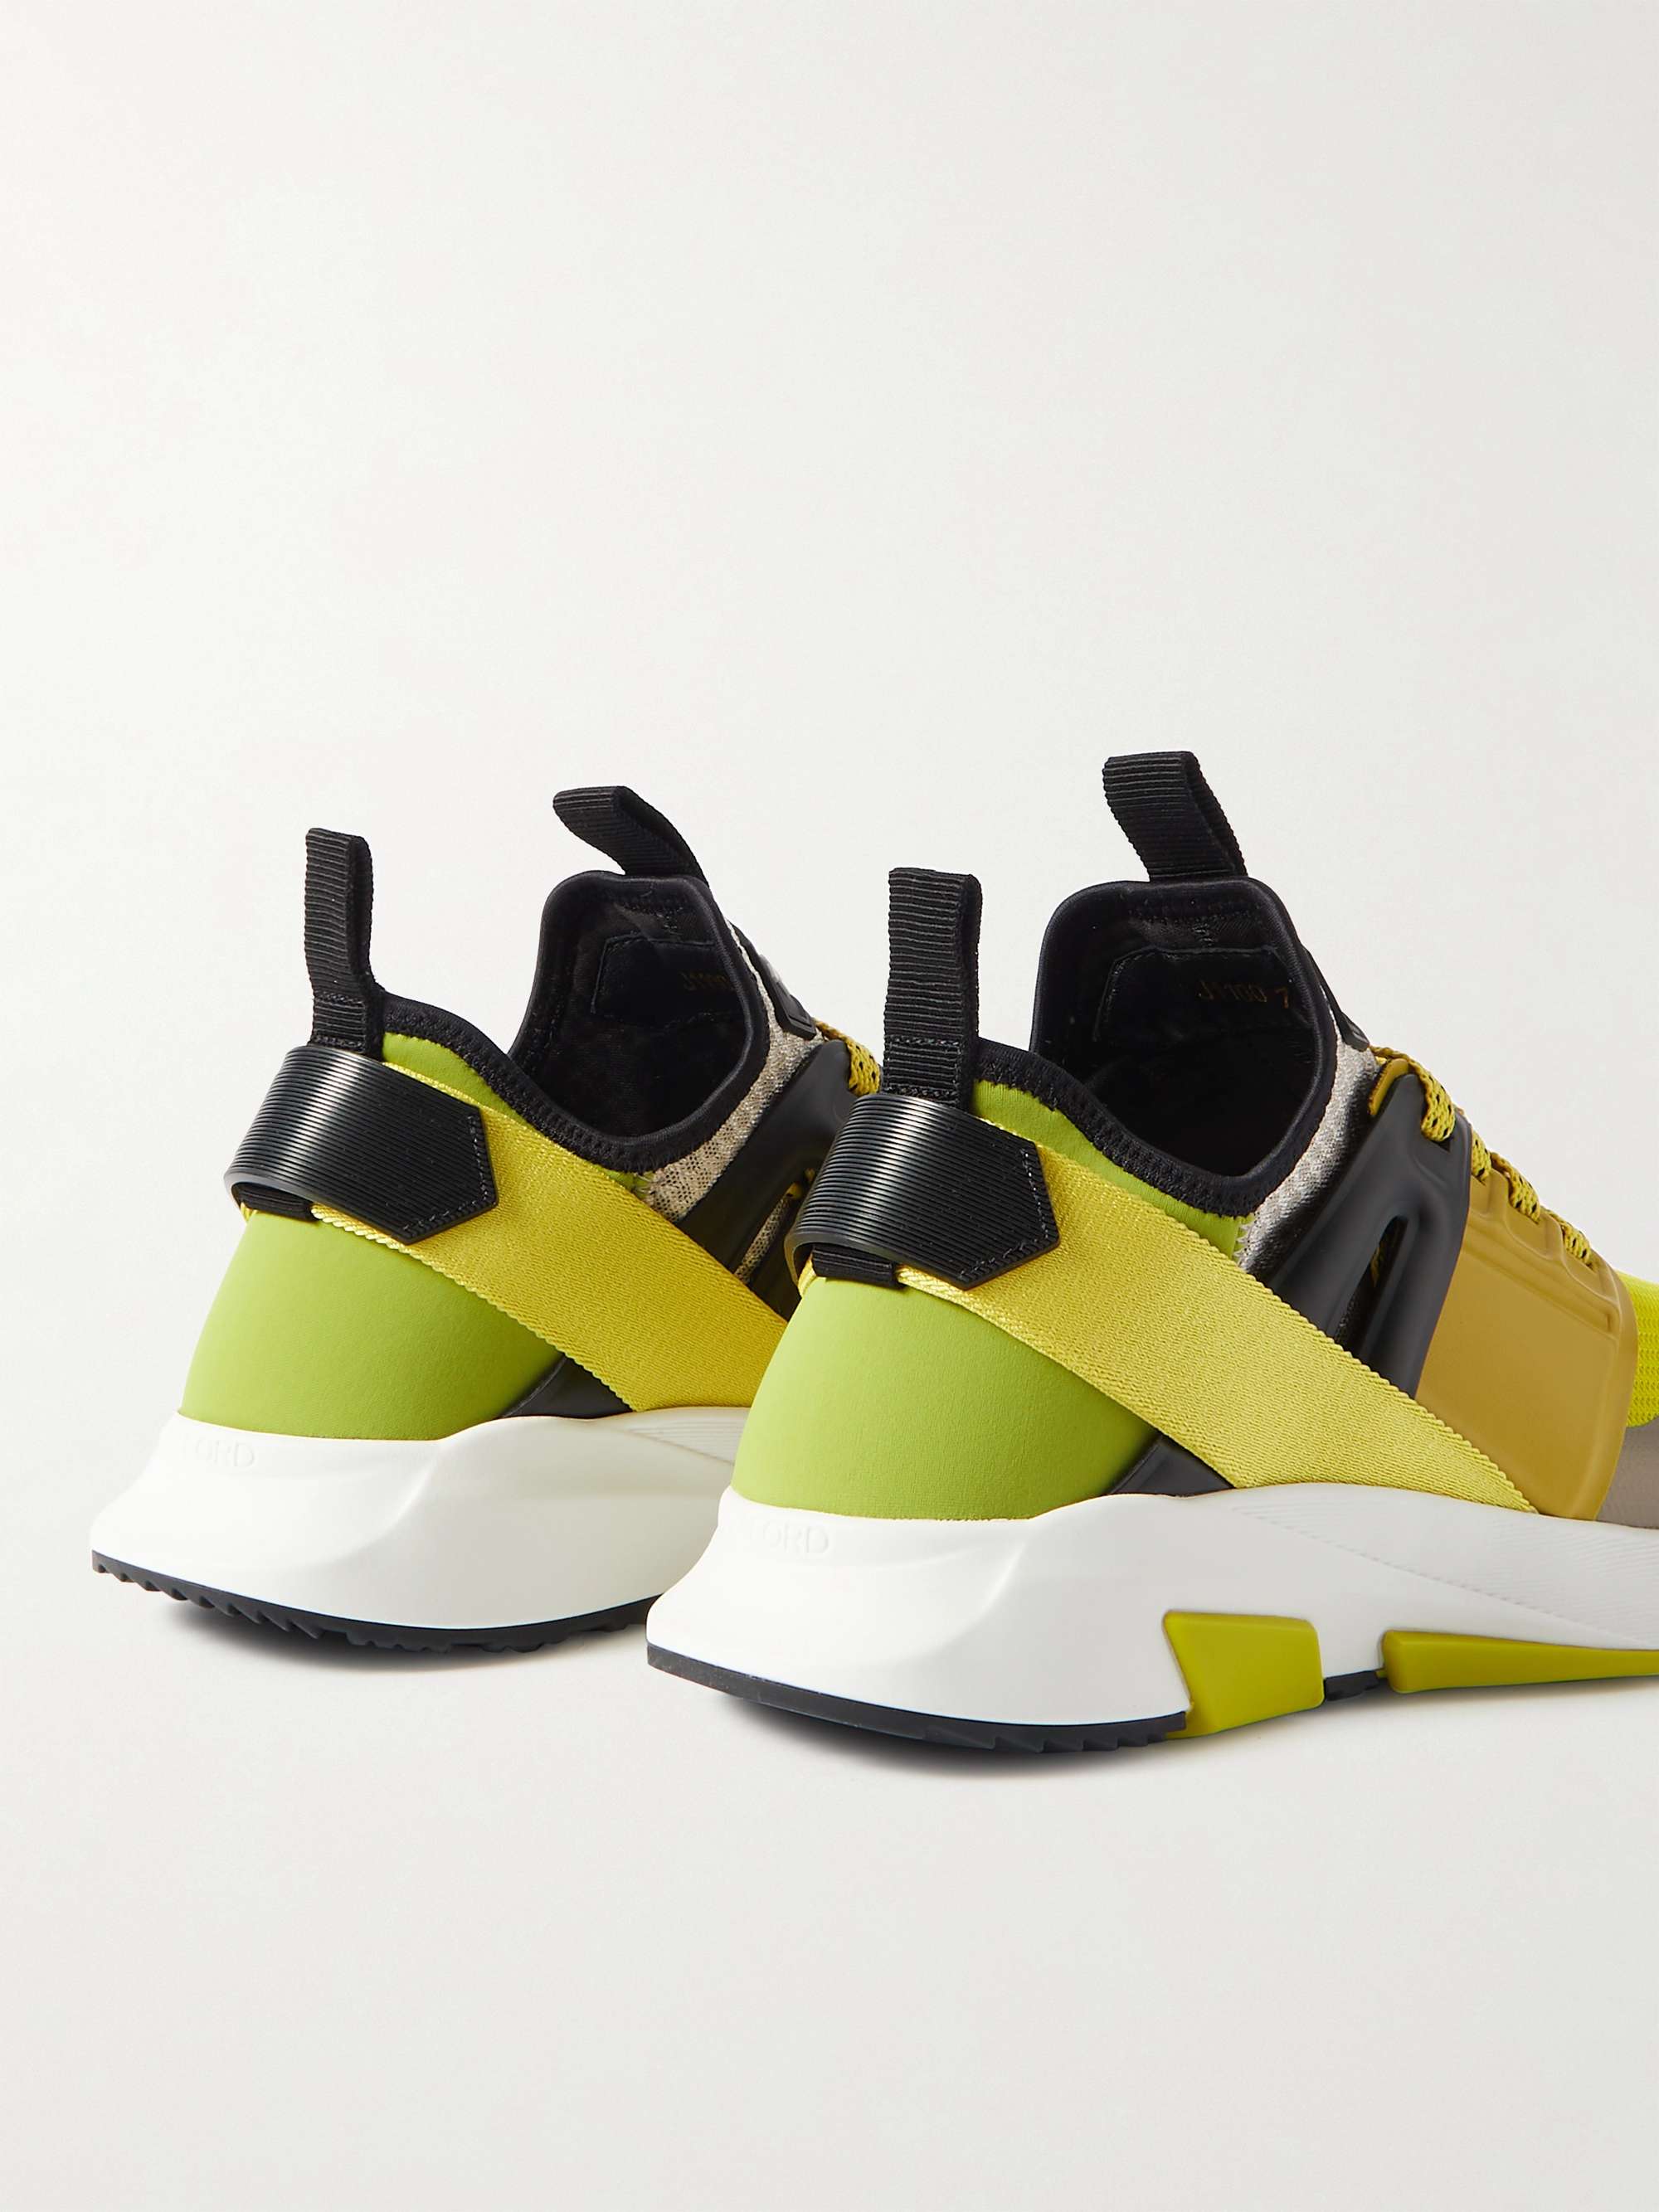 TOM FORD Jago Scuba, Mesh and Leather Sneakers for Men | MR PORTER